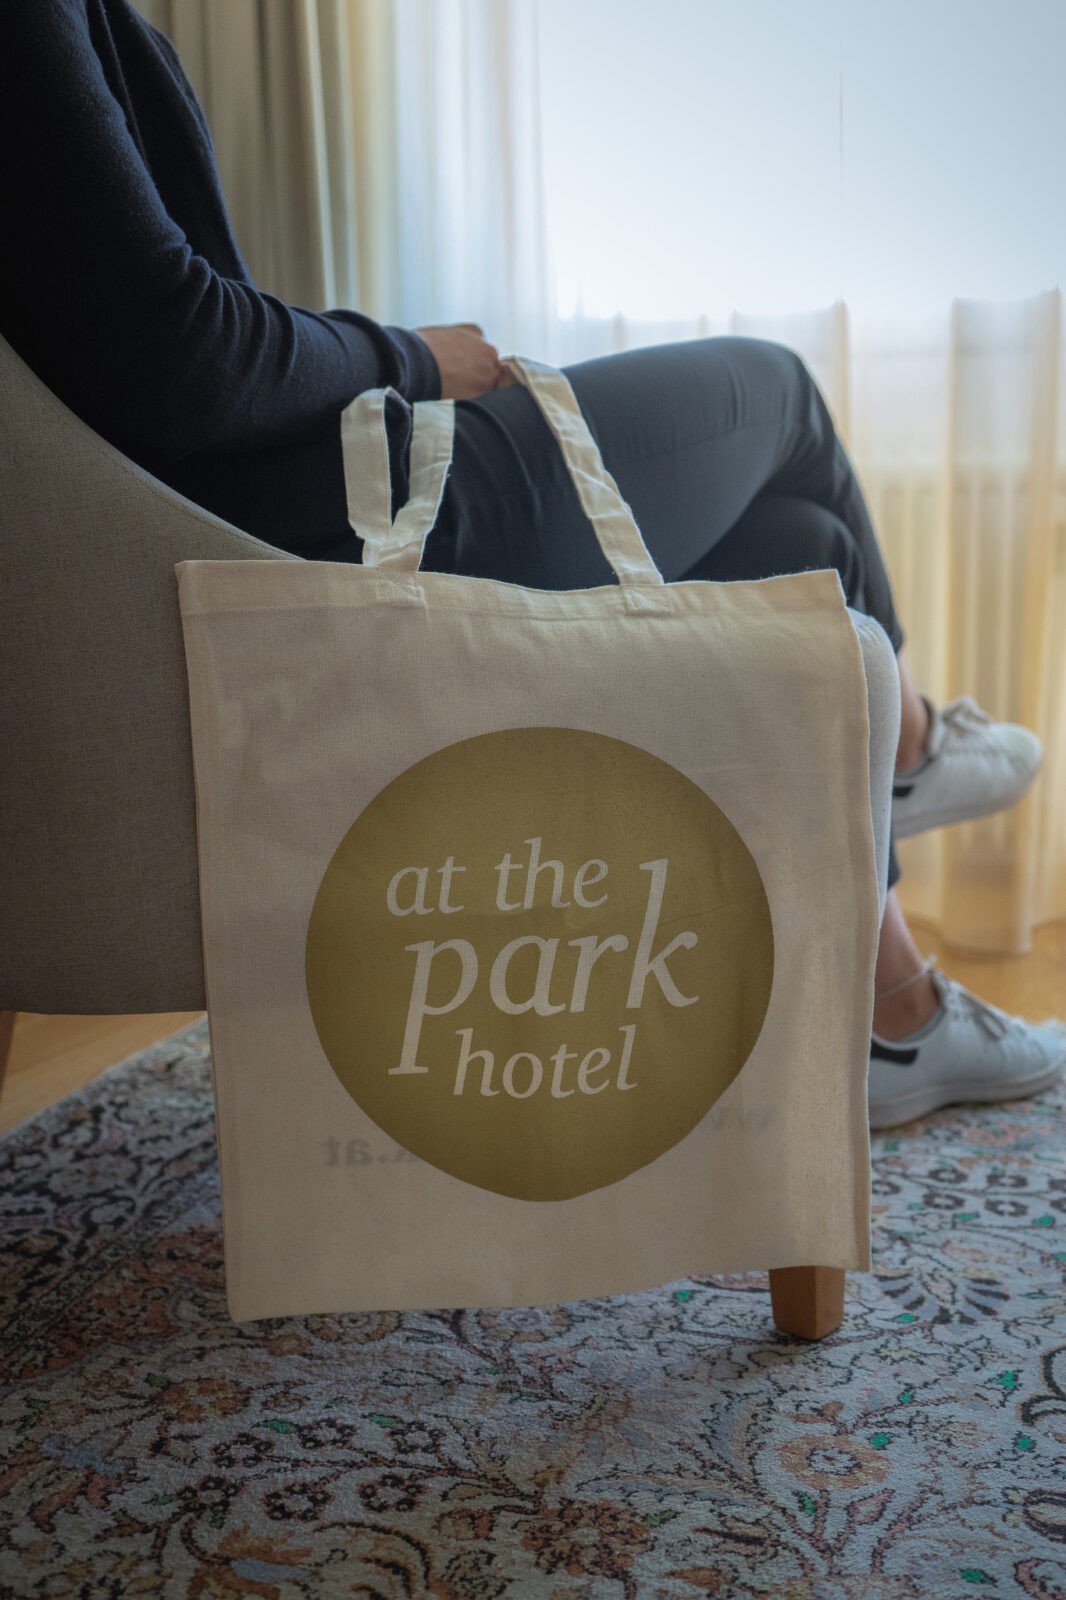 New in: "At the Park" Stofftasche